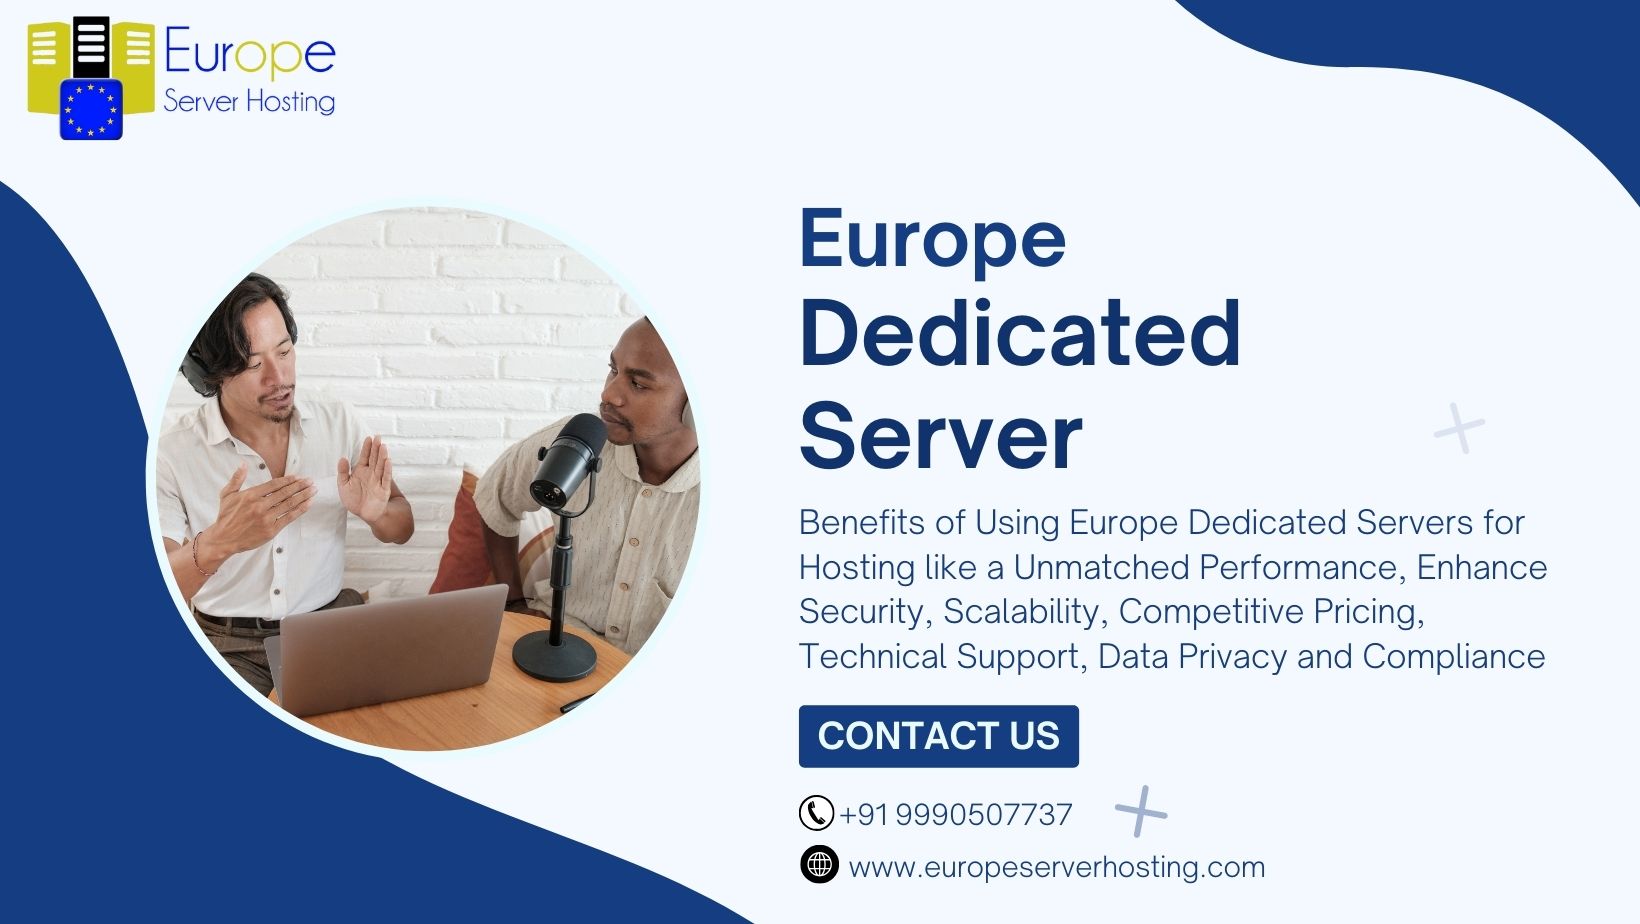 Dedicated servers in Europe allow for extensive customization to meet your specific hosting requirements